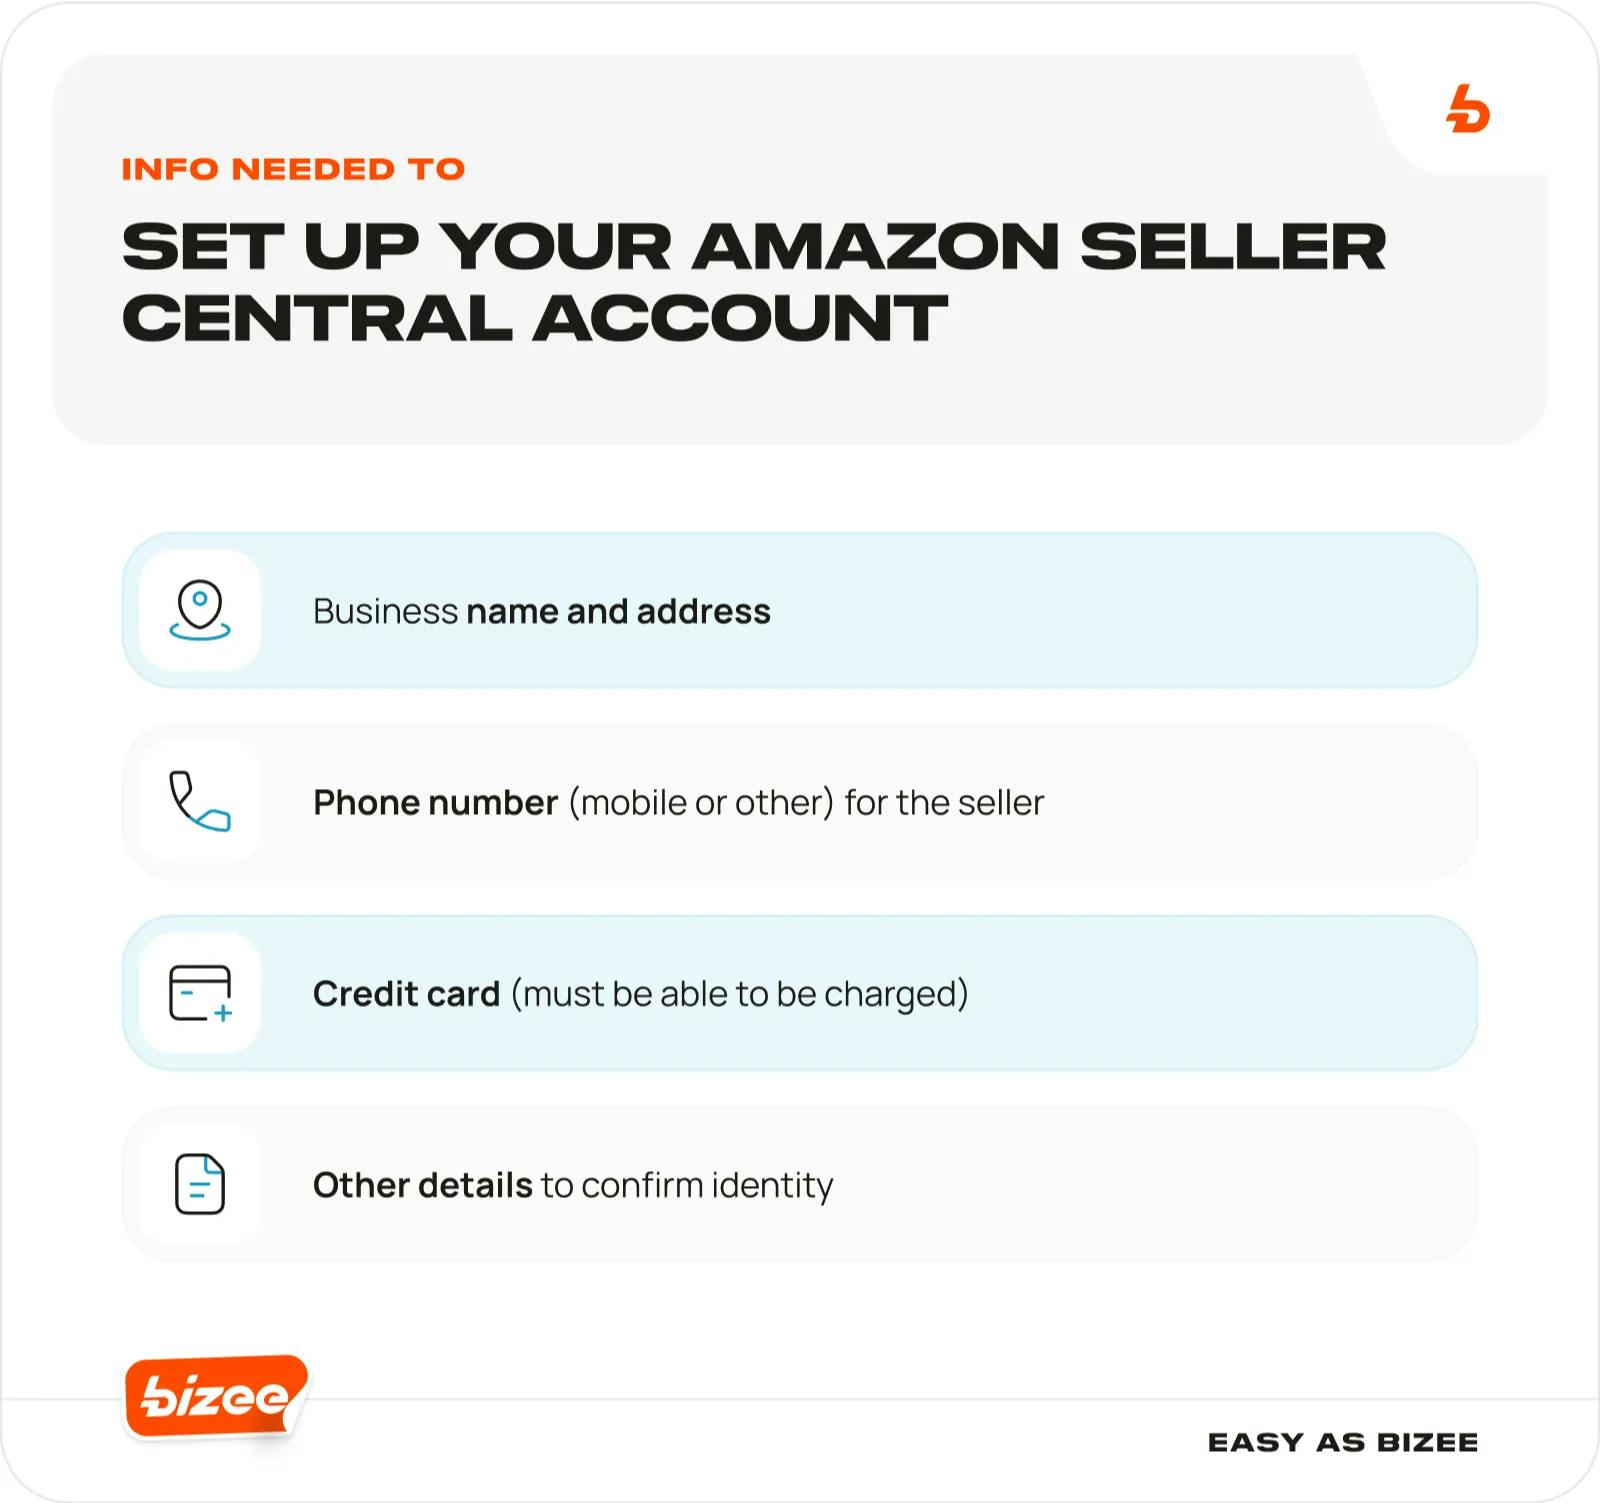 Info Needed to Set Up Your Amazon Seller Central Account 